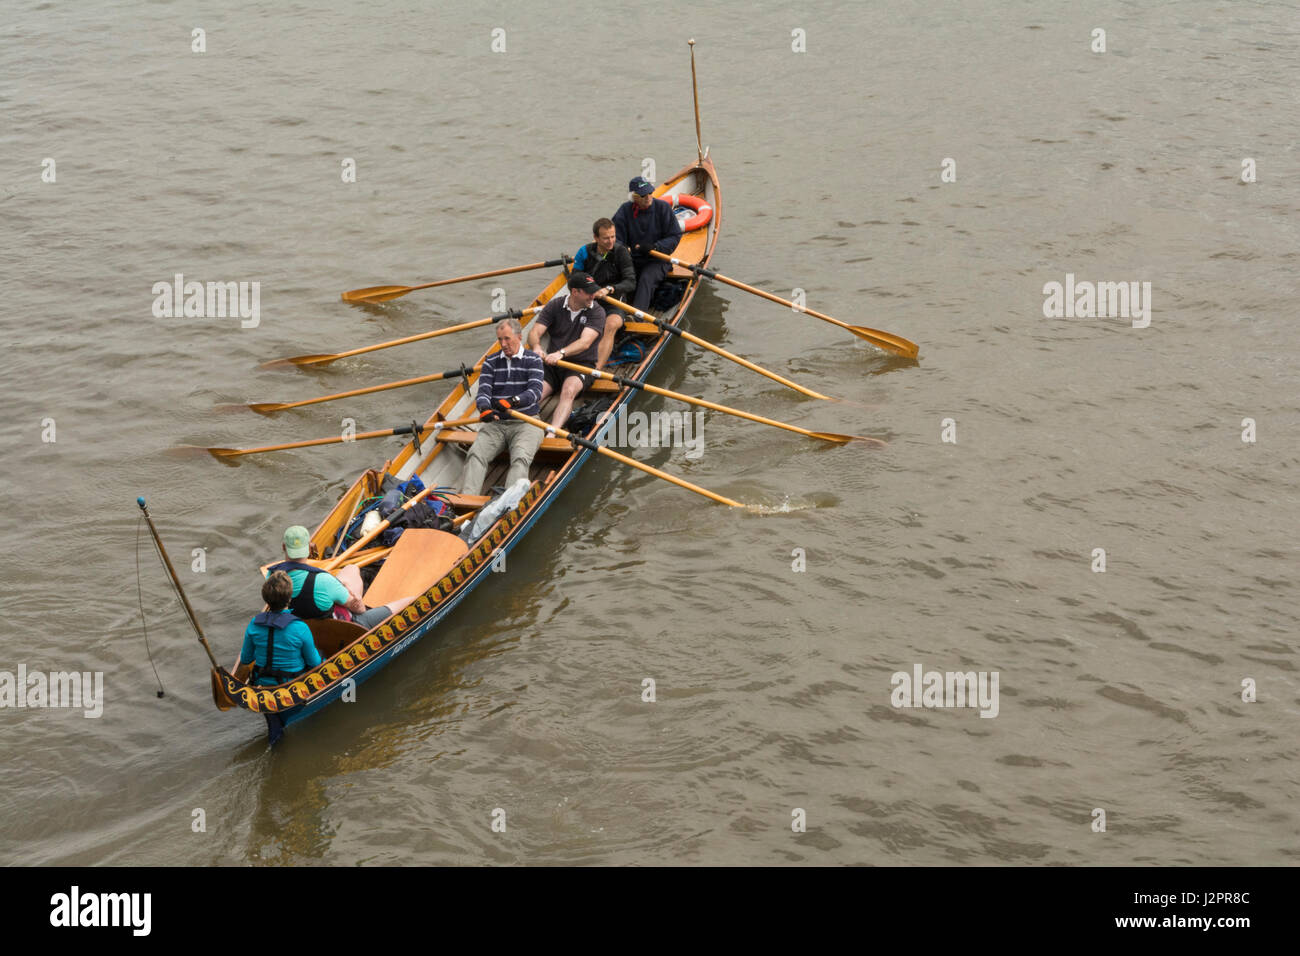 A Cornish Pilot Gig being rowed on the River Thames in London, England, UK Stock Photo